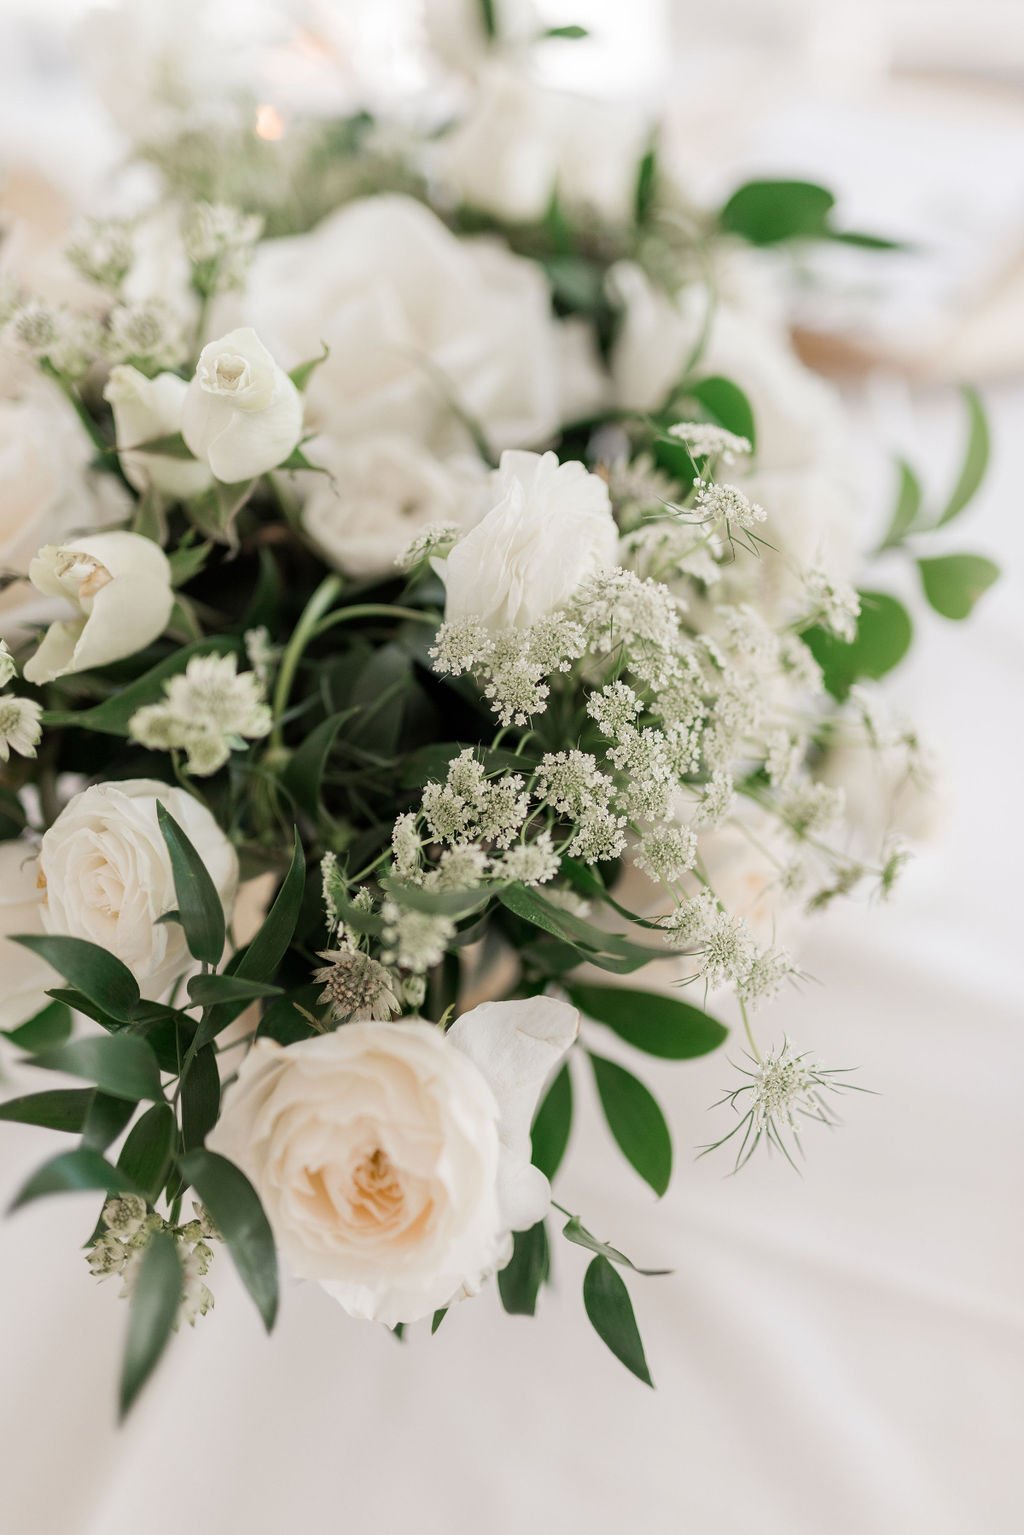 rachel-and-jarrods-classic-white-wedding-florals-designed-by-savannah-florist-ivory-and-beau-for-elegant-wedding-at-the-mackey-house-26.jpg